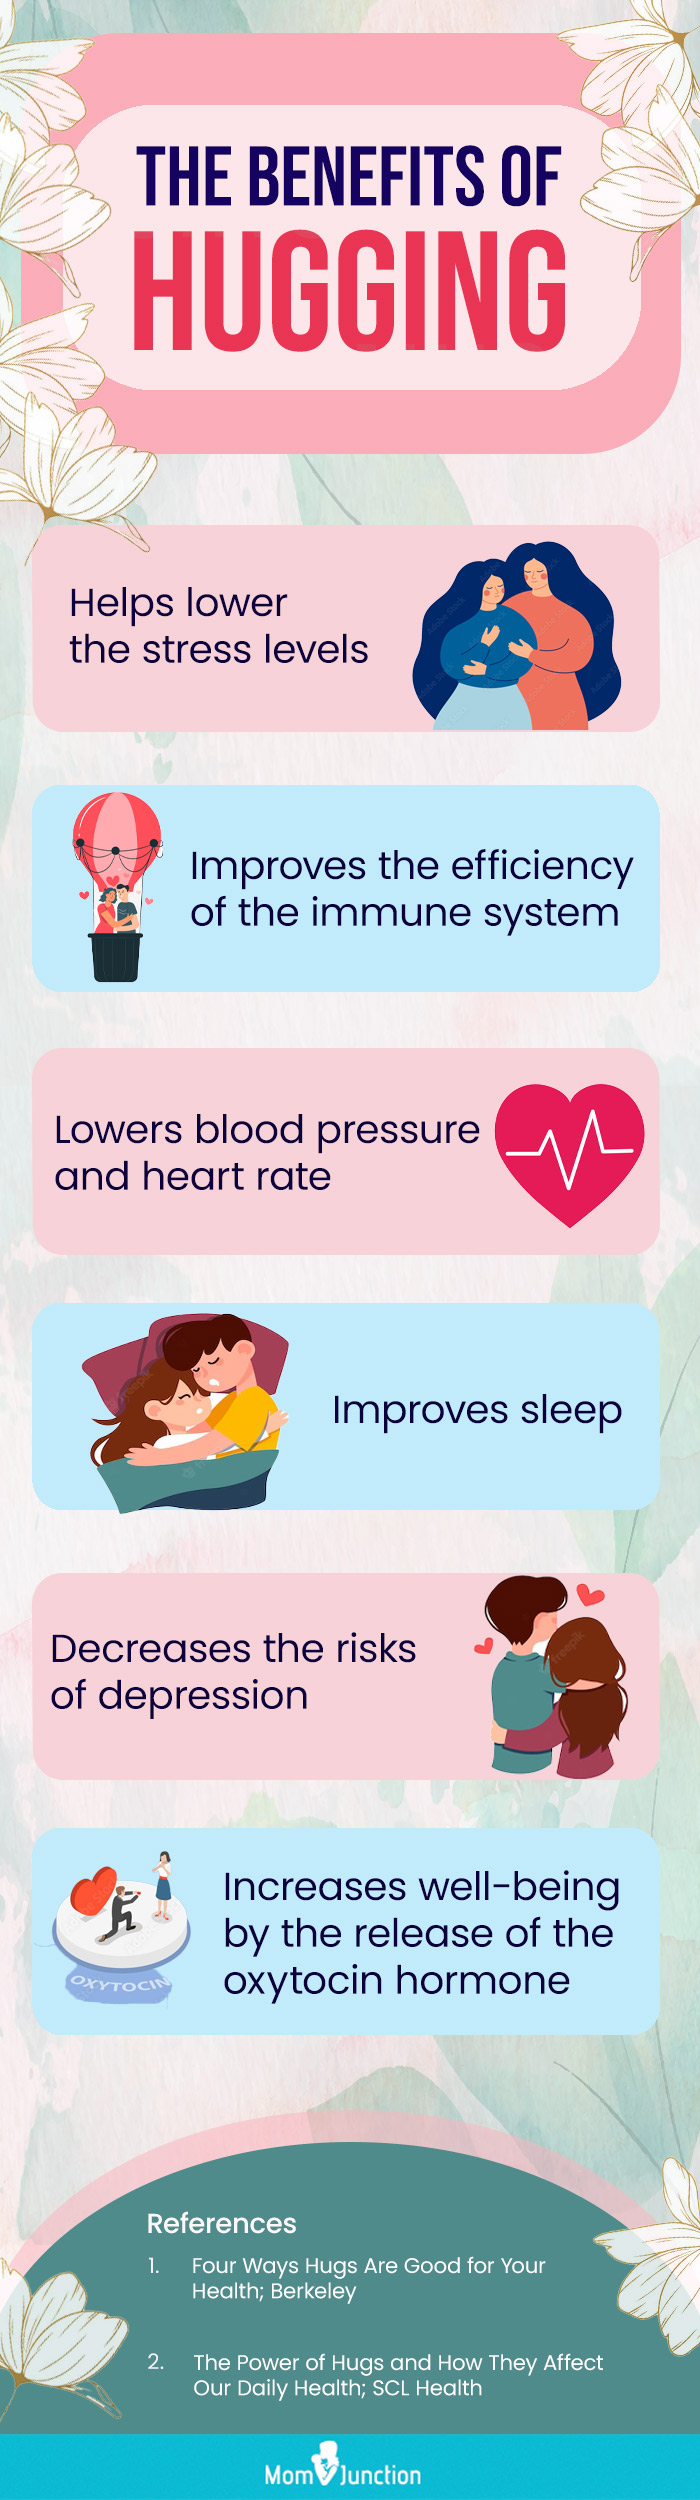 the benefits of hugging [infographic]